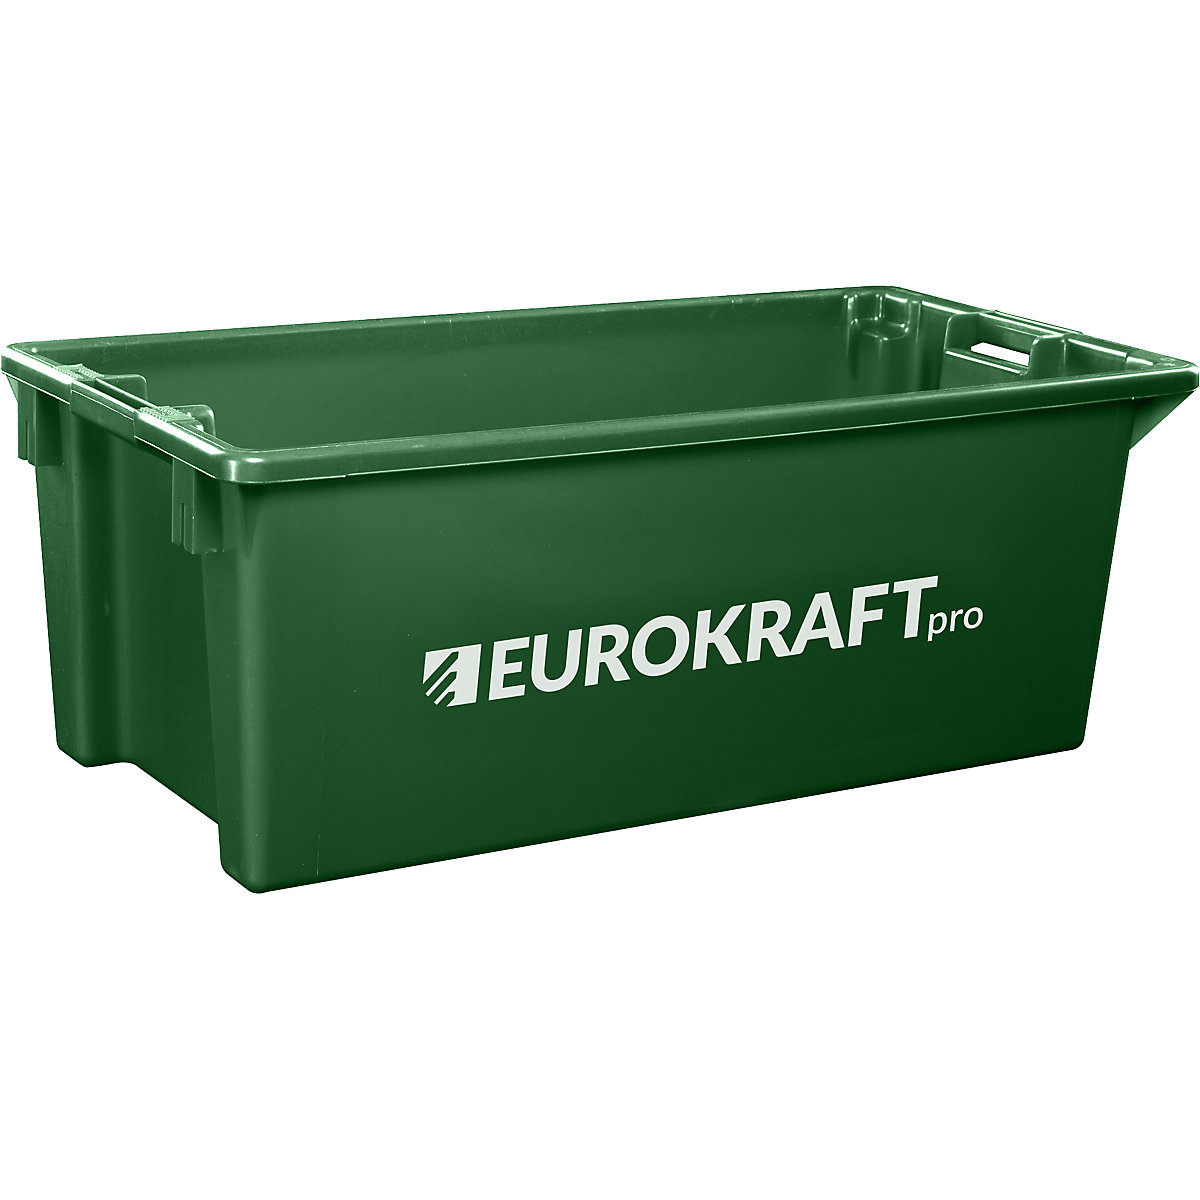 EUROKRAFTpro – Stack/nest container made of polypropylene suitable for foodstuffs, 13 l capacity, pack of 4, solid walls and base, green